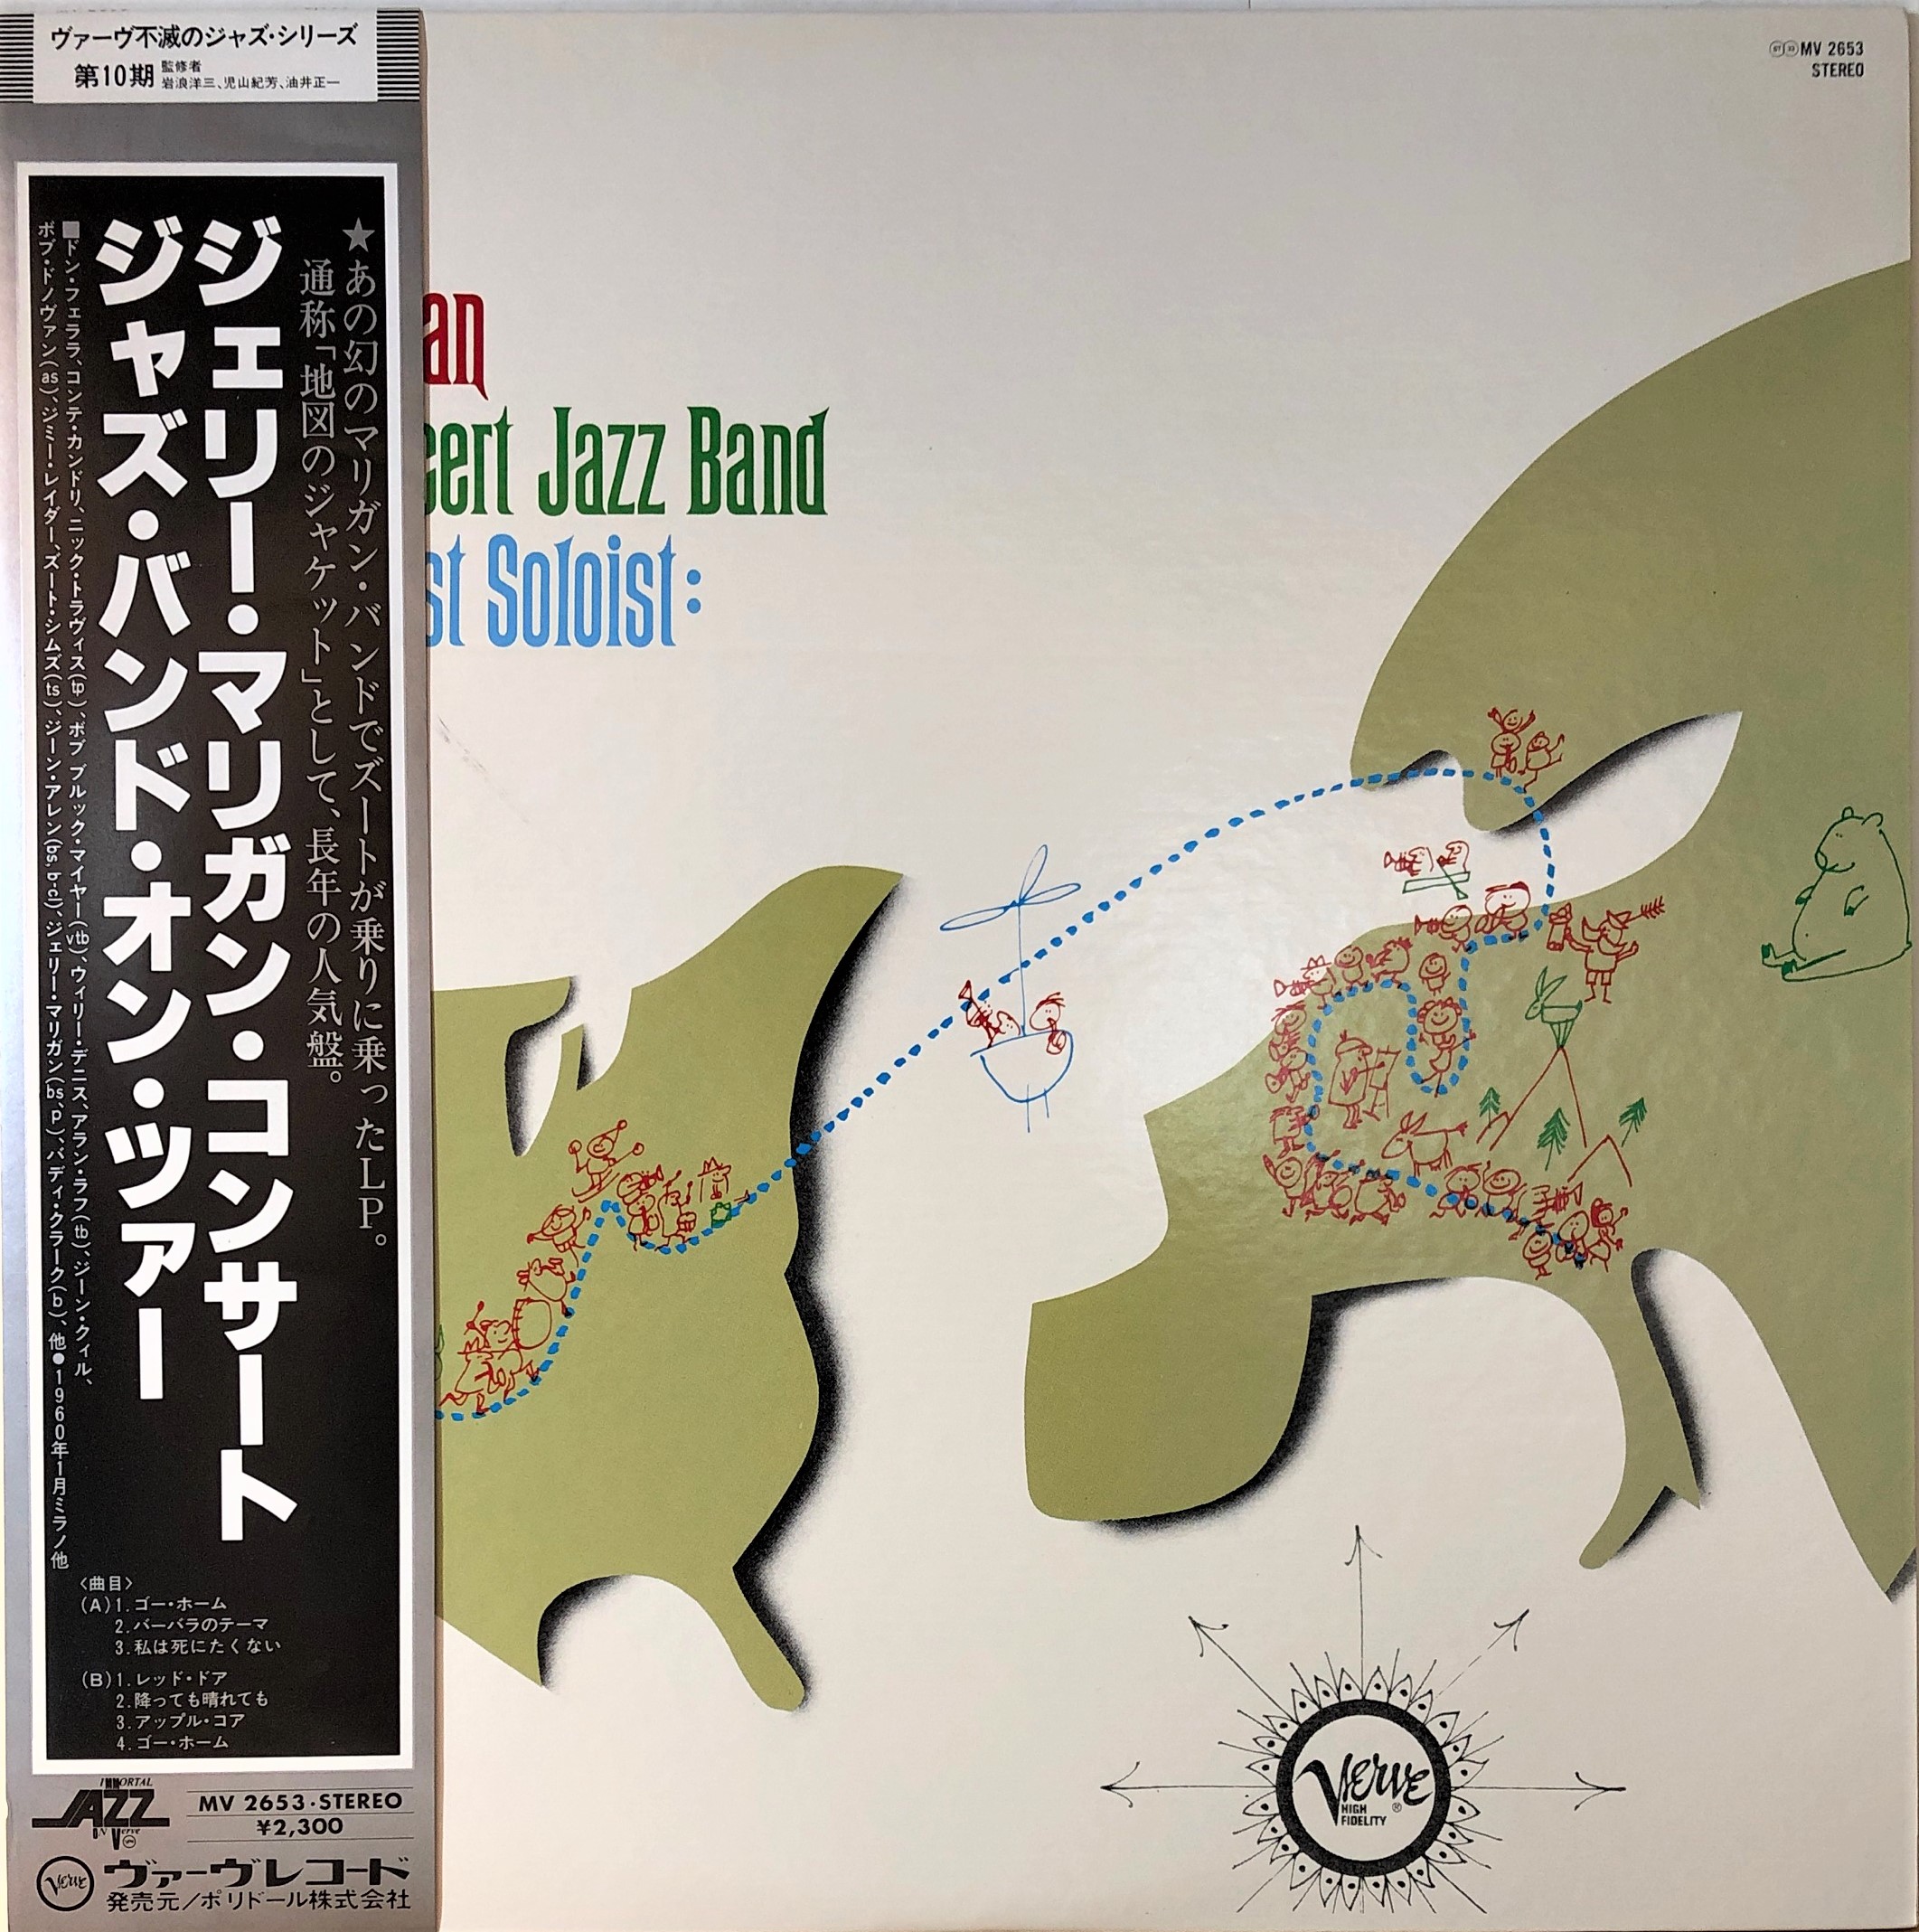 And　Concert　Gerry　Concert　Zoot　And　Band　Mulligan　Jazz　Band*　The　Soloist:　Jazz　On　Mulligan　Gerry　Guest　Sims　‎–　The　Tour　中古レコード通販・買取のアカル・レコーズ